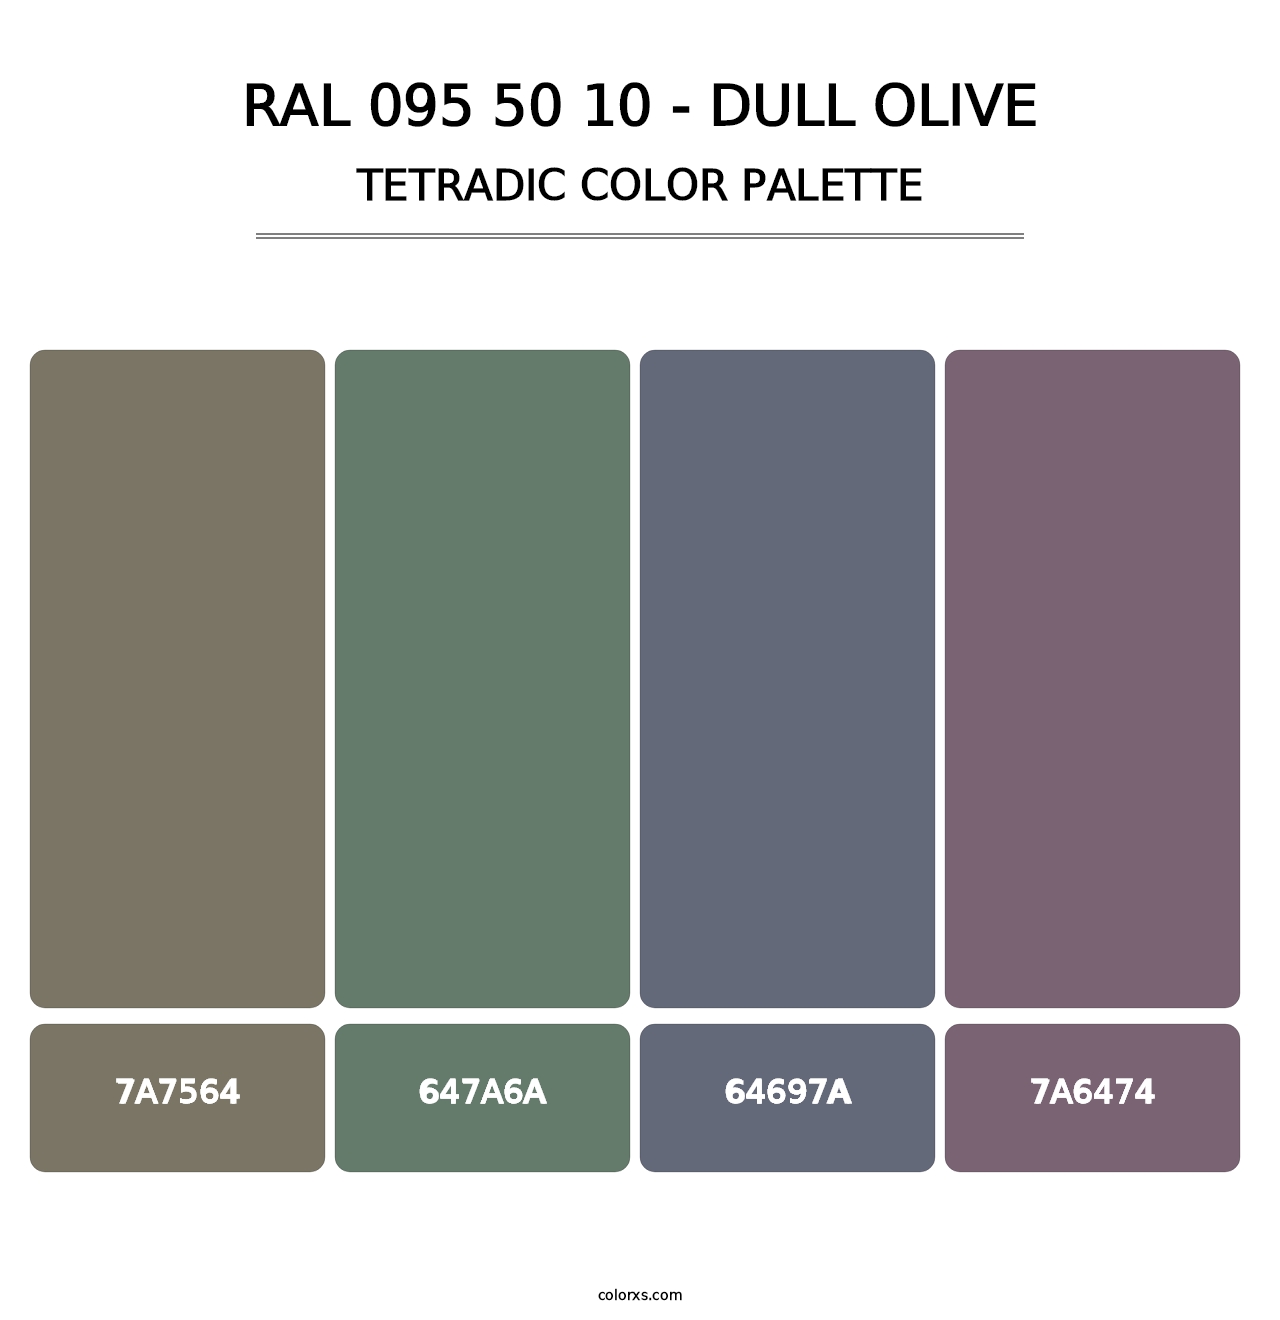 RAL 095 50 10 - Dull Olive - Tetradic Color Palette